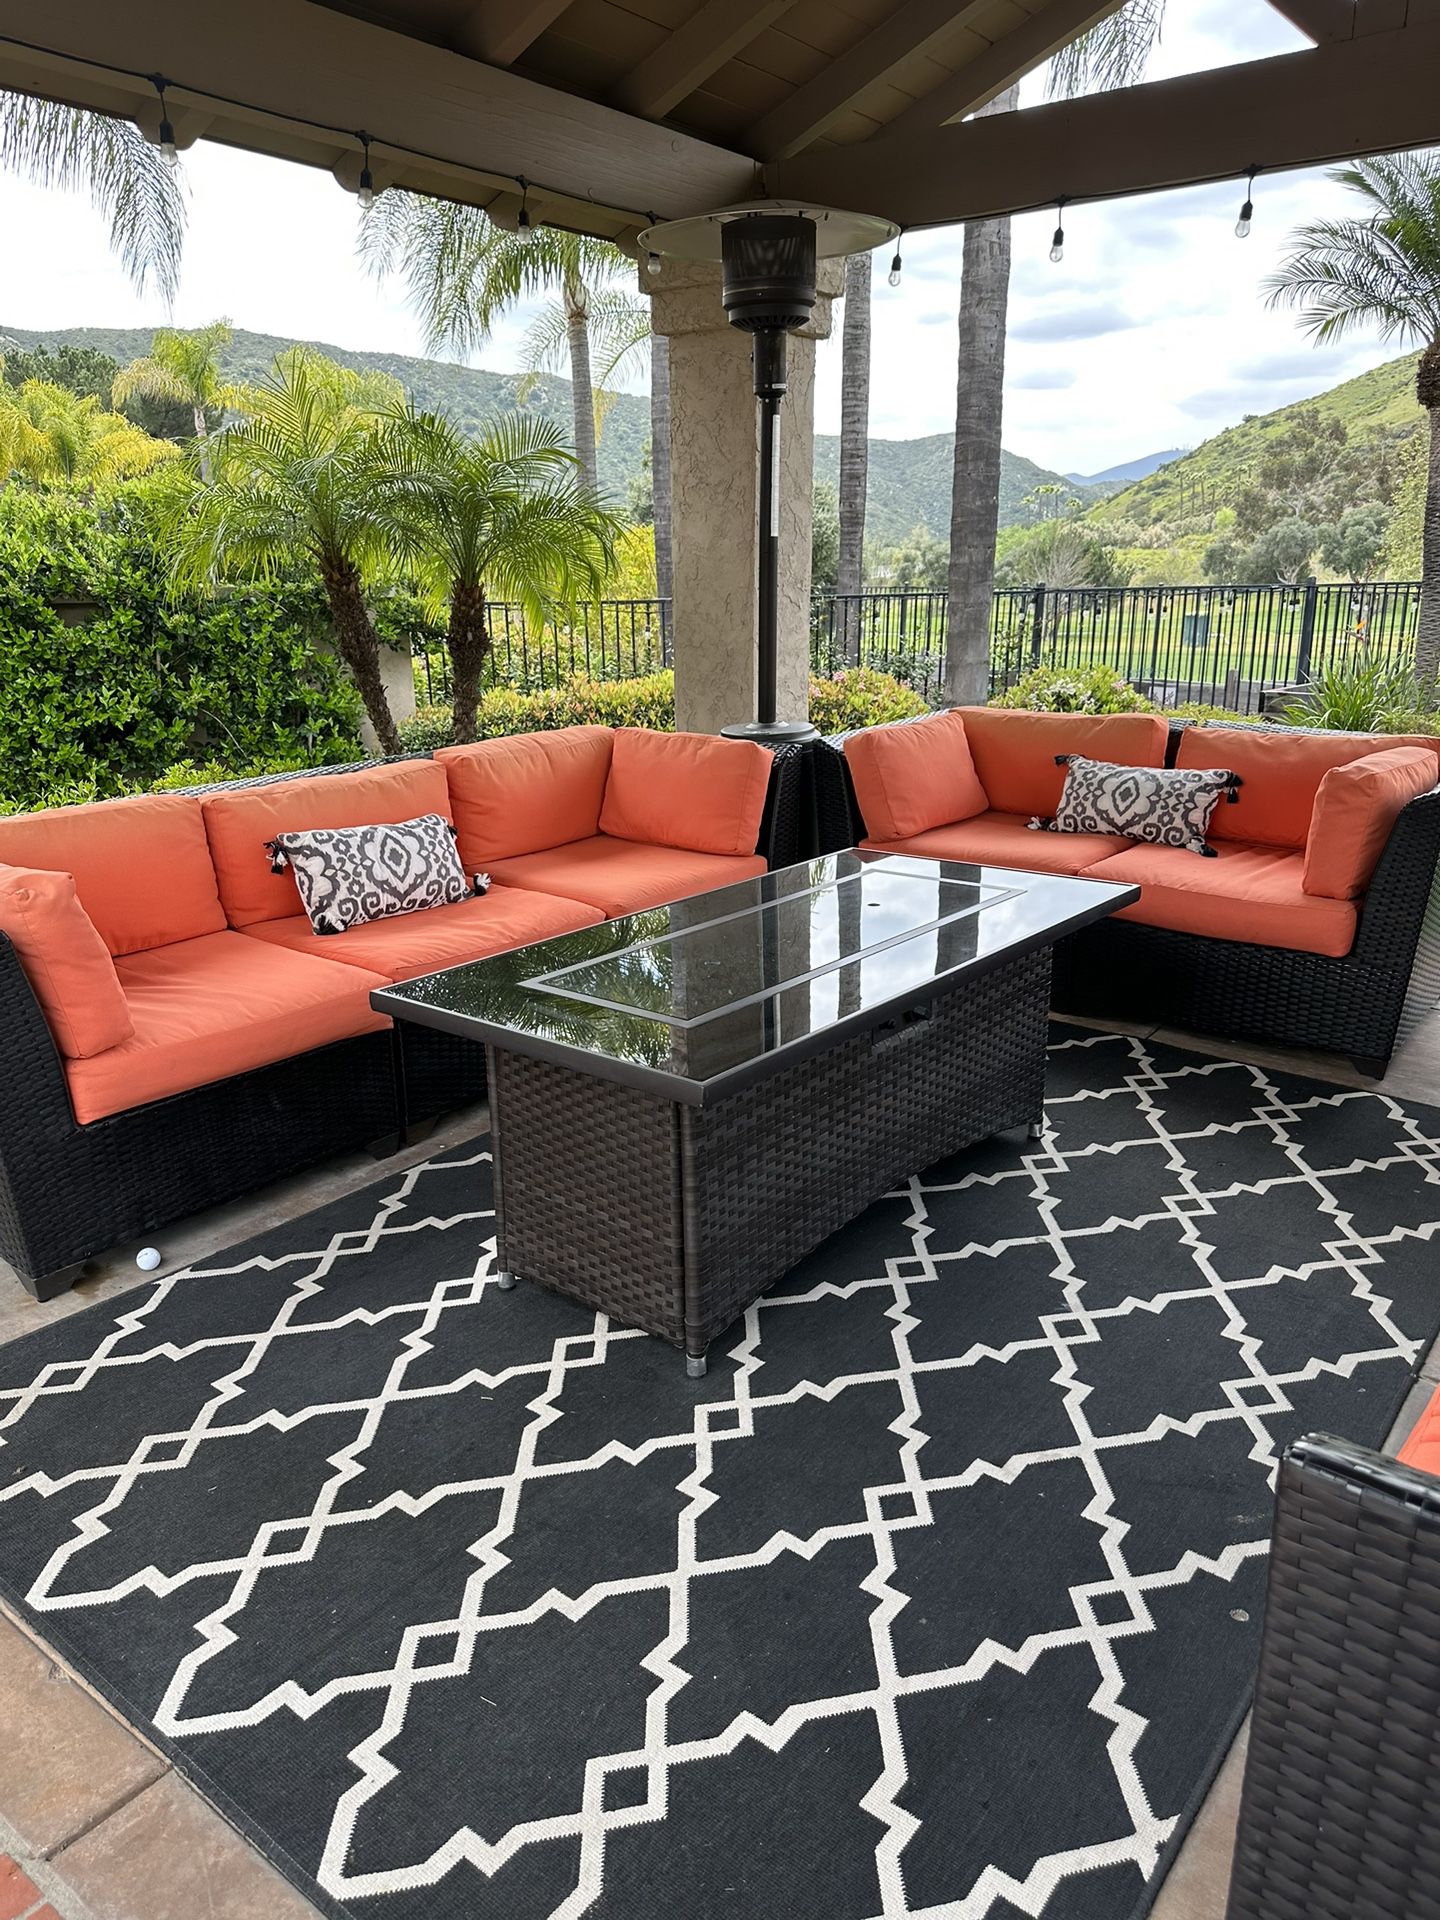 9 Piece Outdoor Set For Sale Wayfair Couch Sofa Chair Table Fire Put Pillows $9k